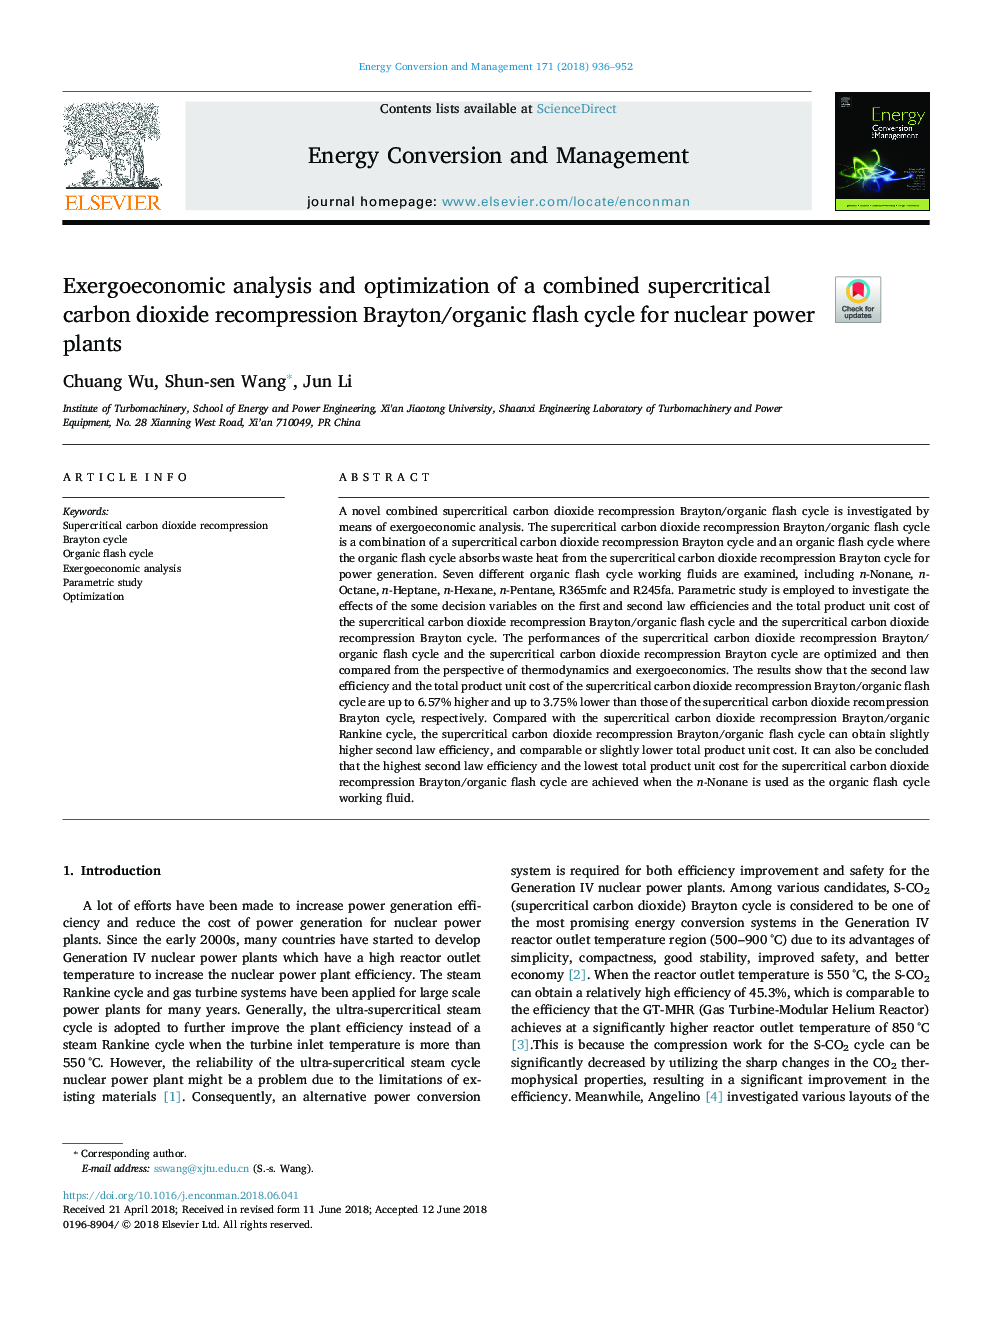 Exergoeconomic analysis and optimization of a combined supercritical carbon dioxide recompression Brayton/organic flash cycle for nuclear power plants